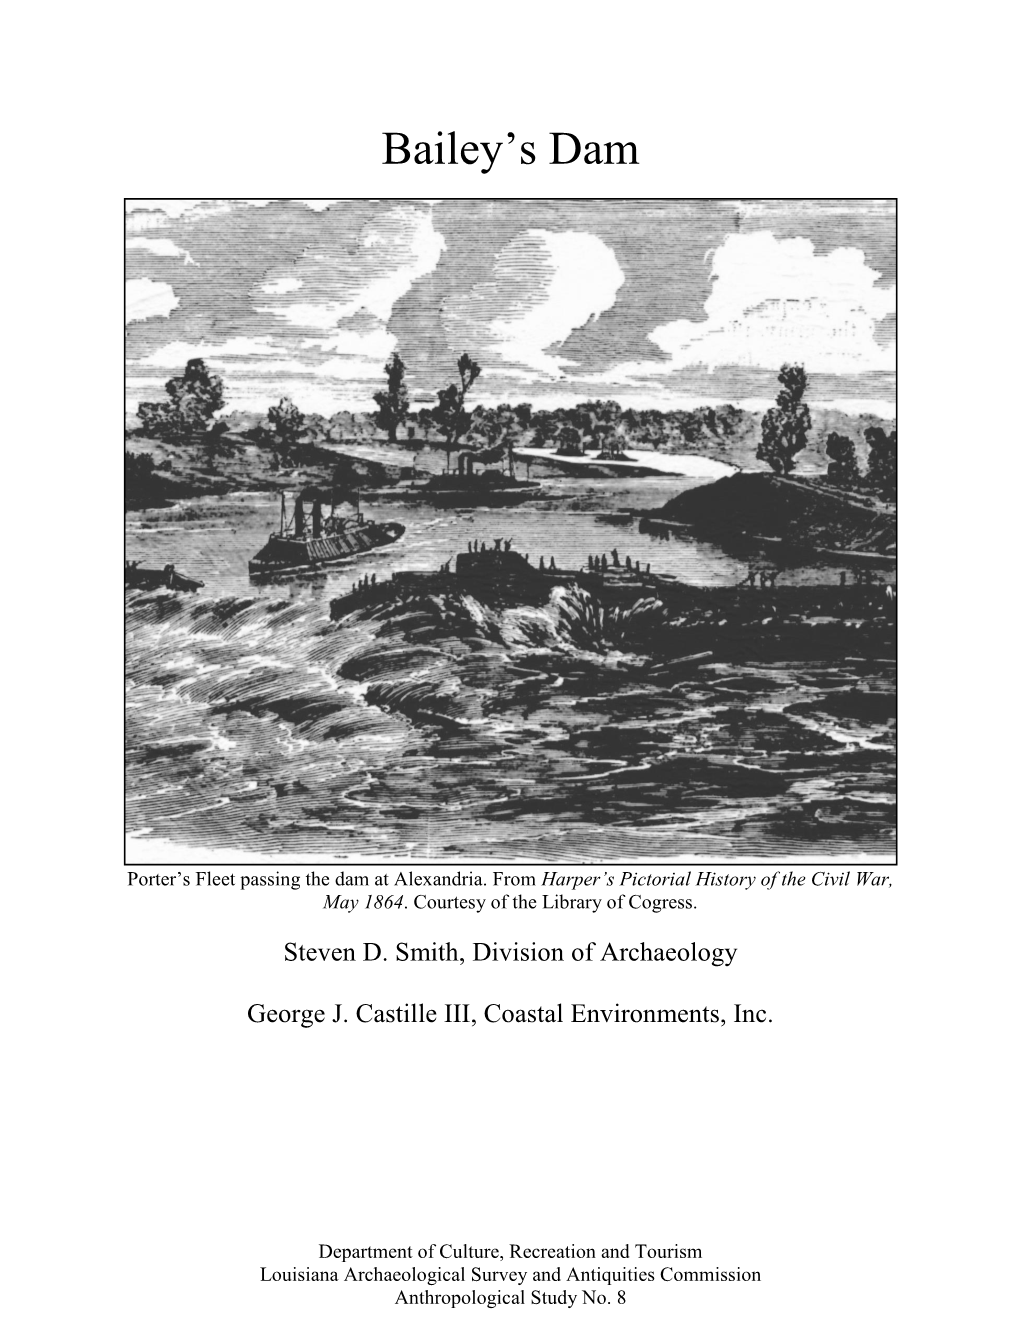 Bailey's Dam Is the Eighth in This Series